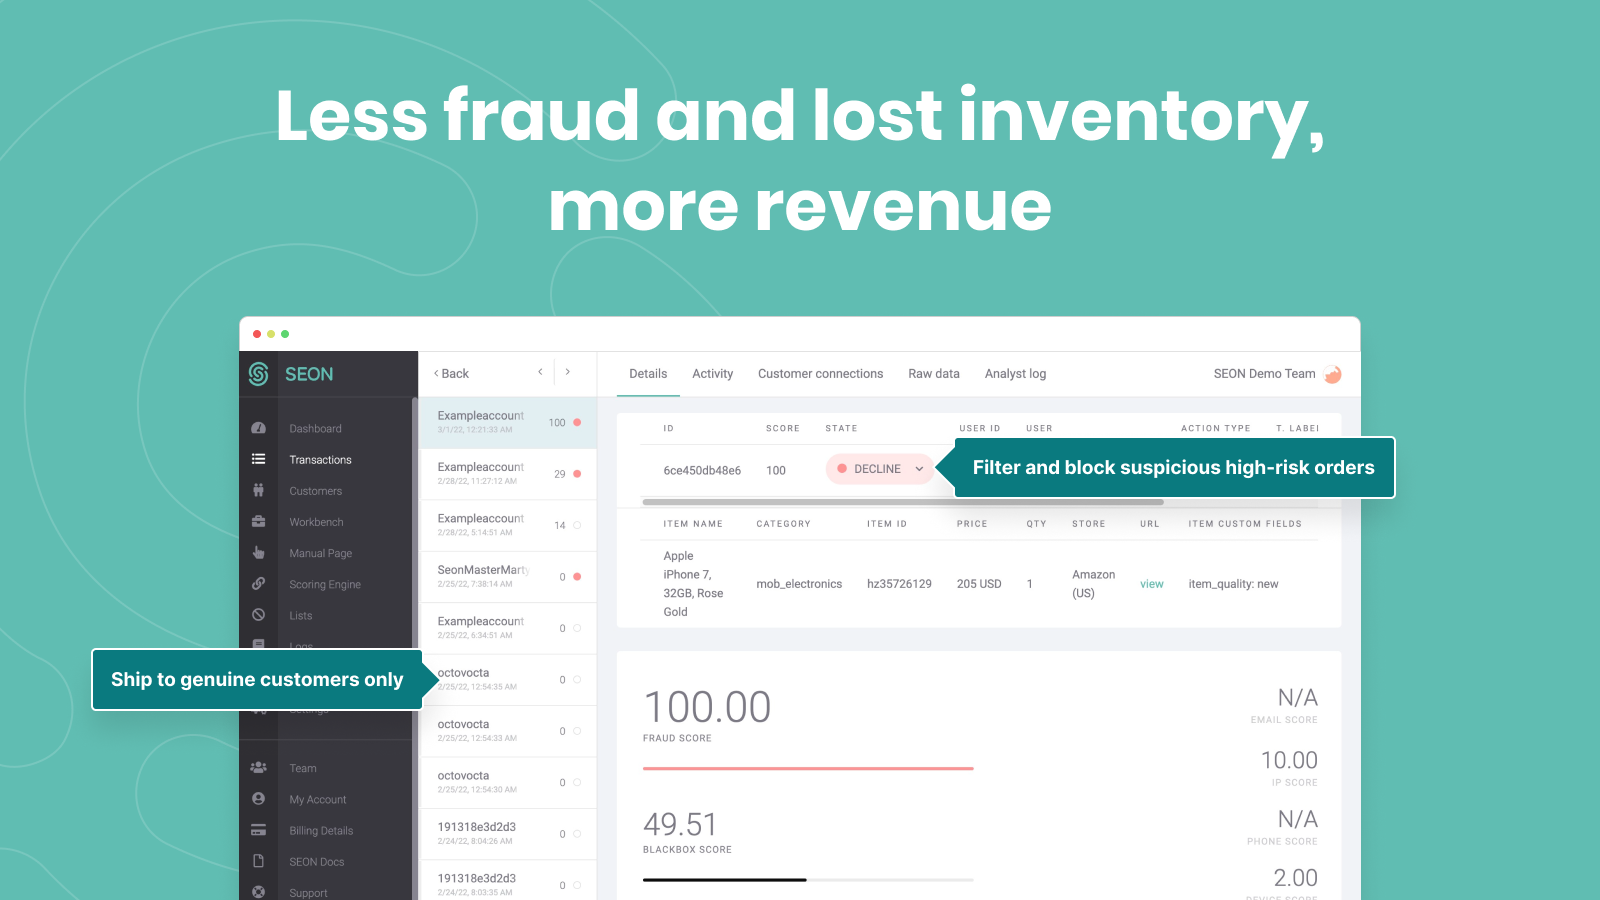 Less fraud and lost inventory, more revenue for your store!